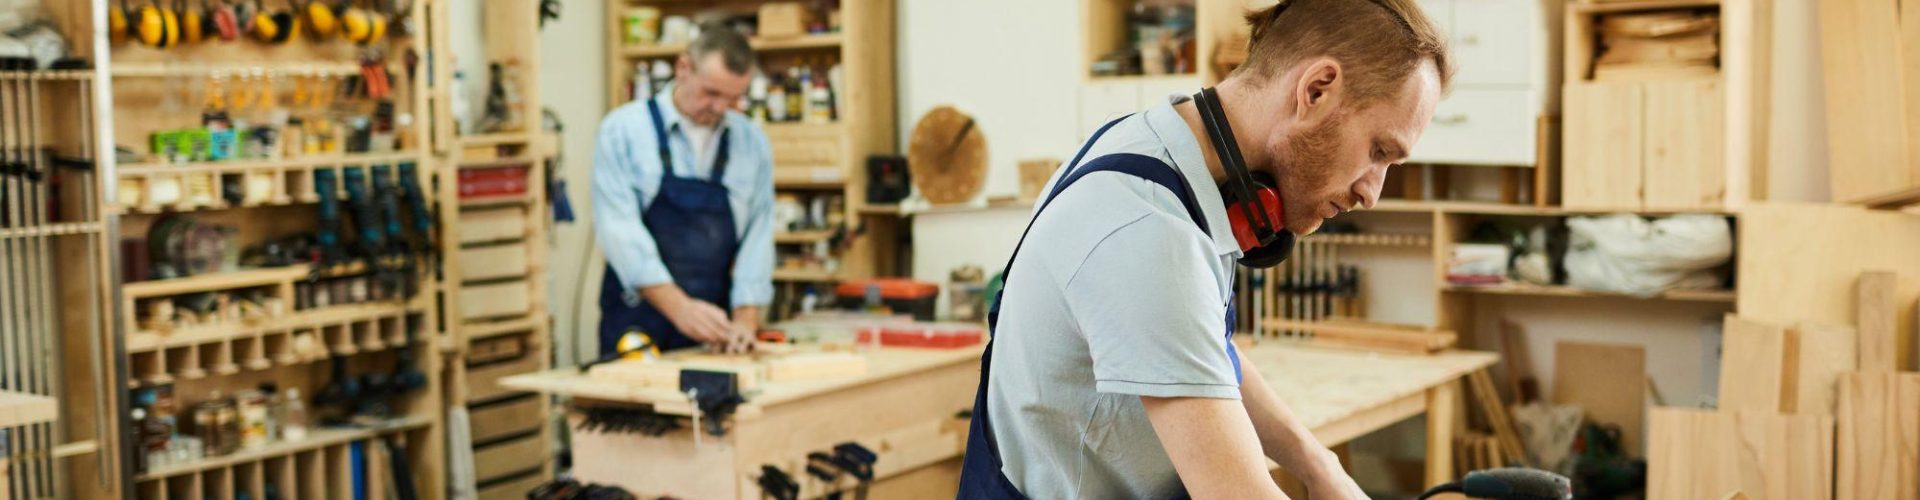 Carpentry and joinery course 2